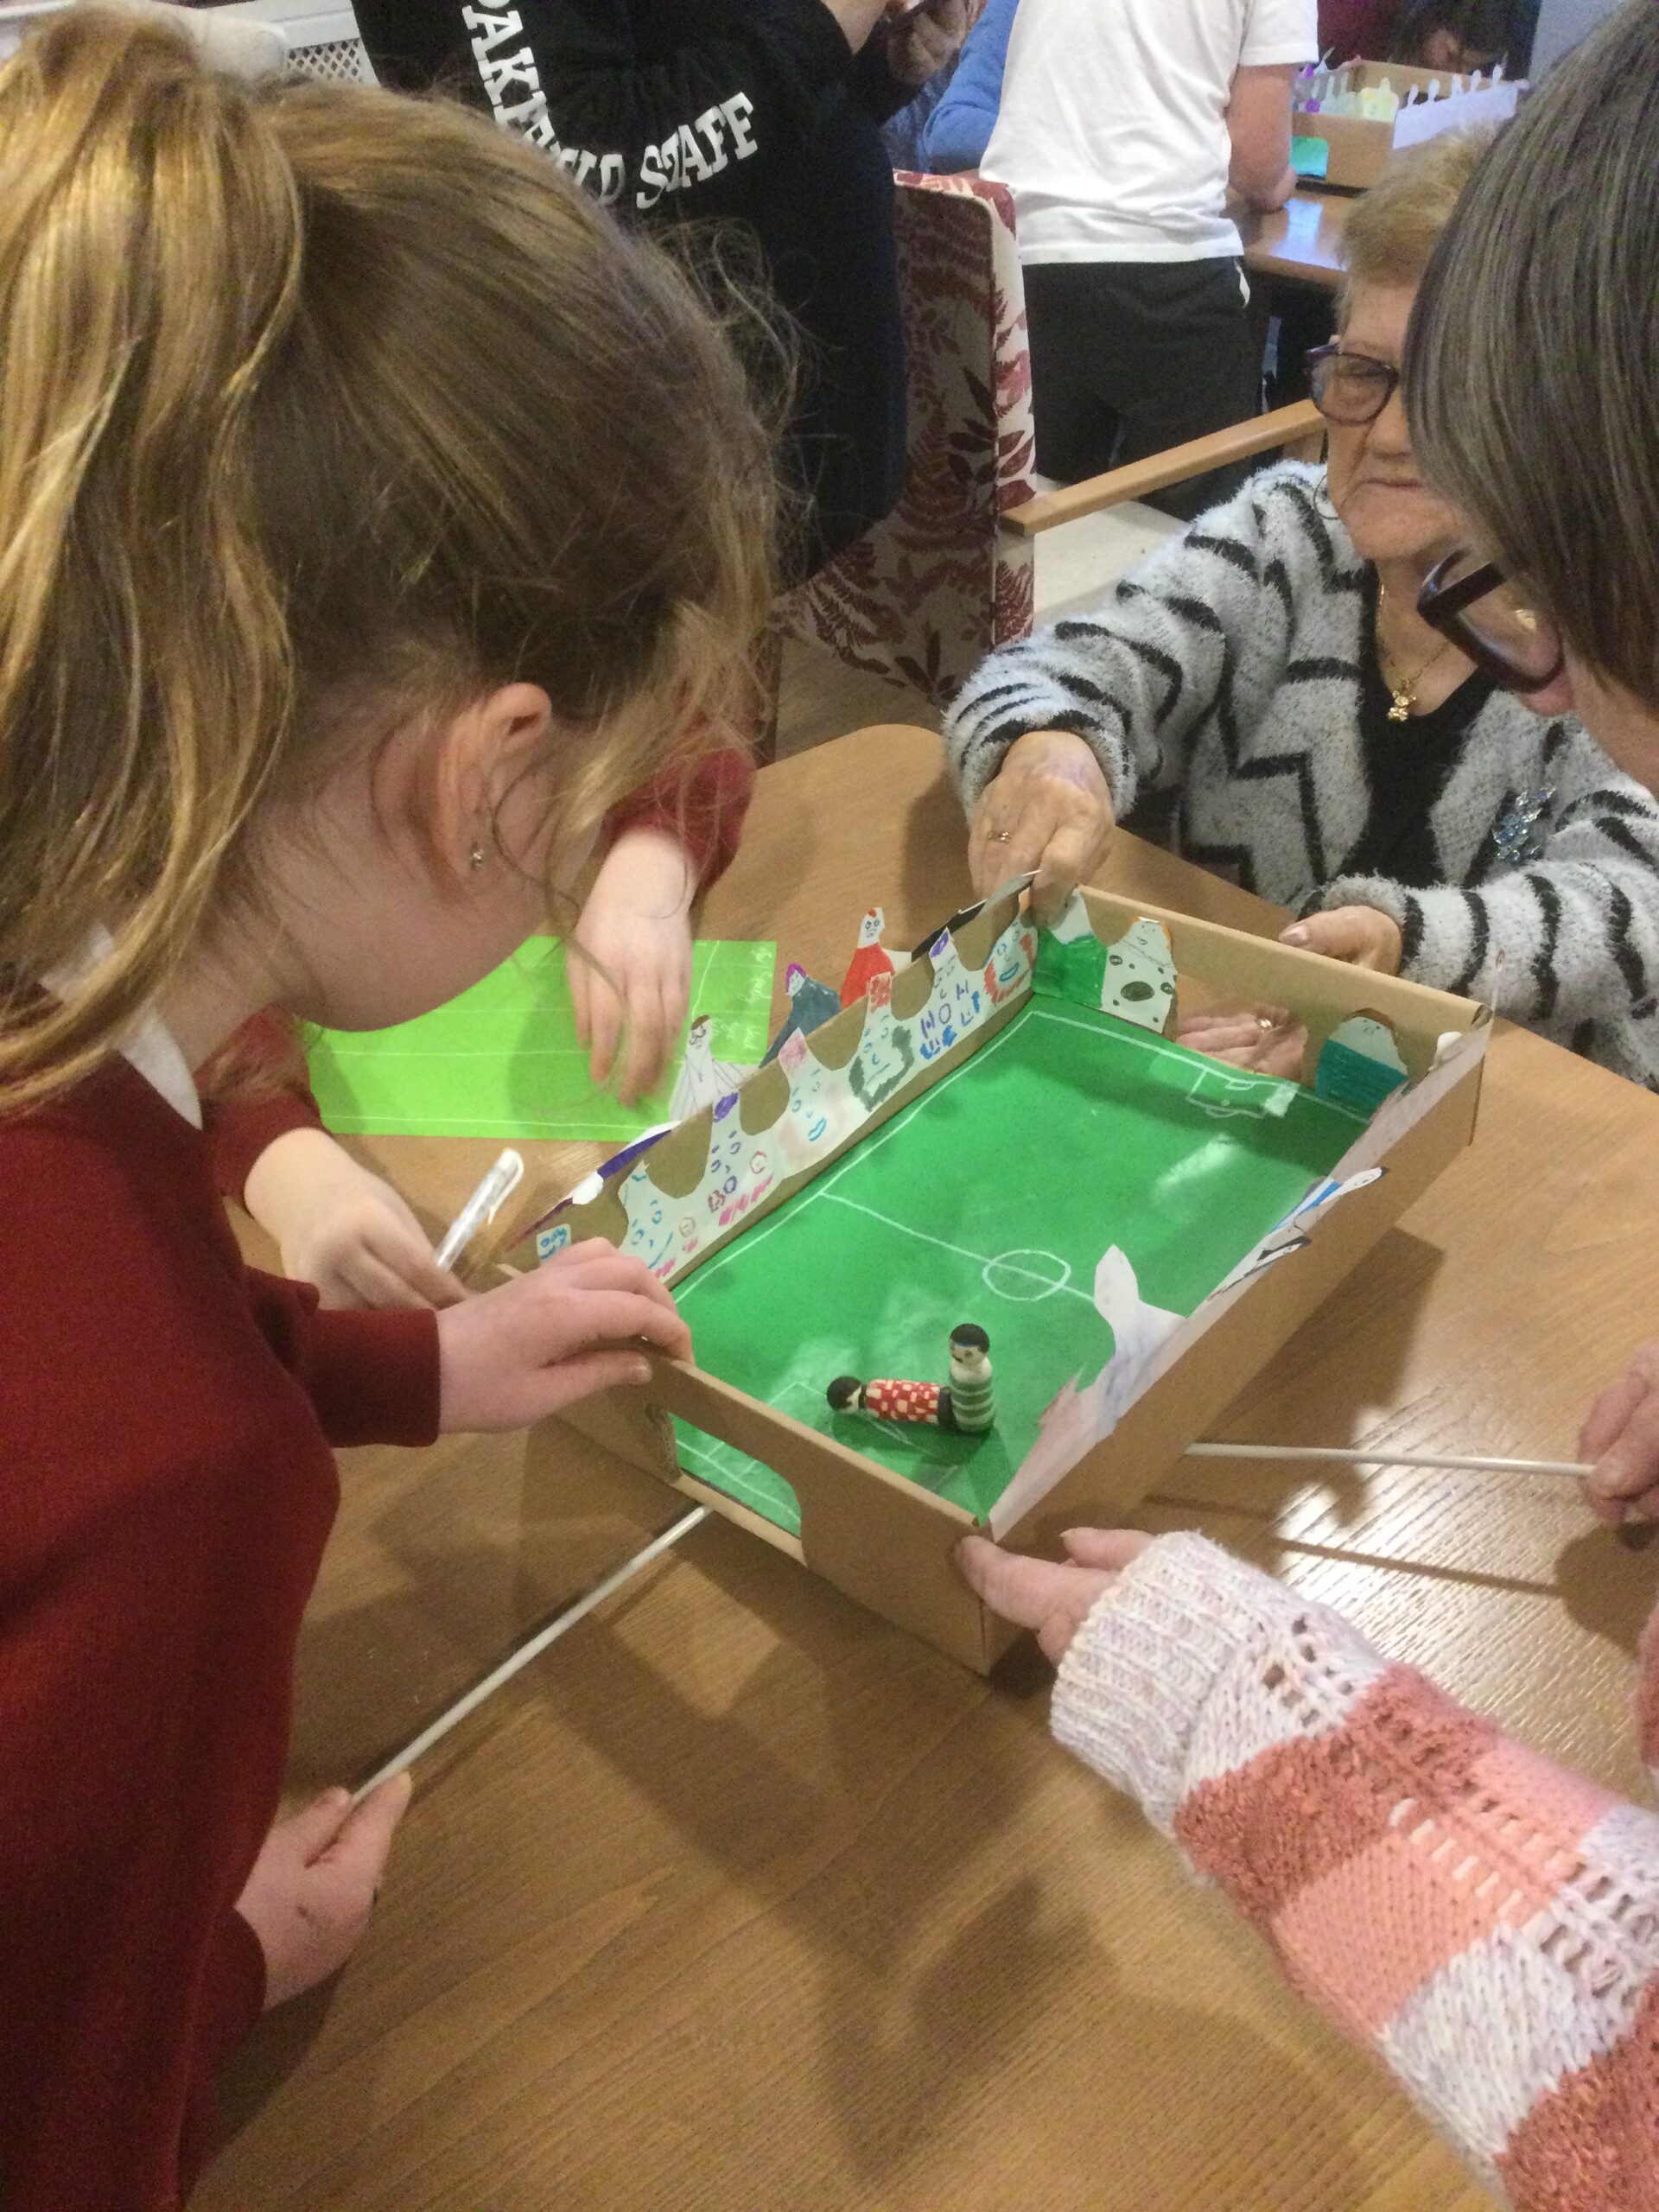 A cardboard football game is on the table. An adult and a child each has a stick running under the box, used to propel the magnetic football figure across the board. Another adult steadies the game